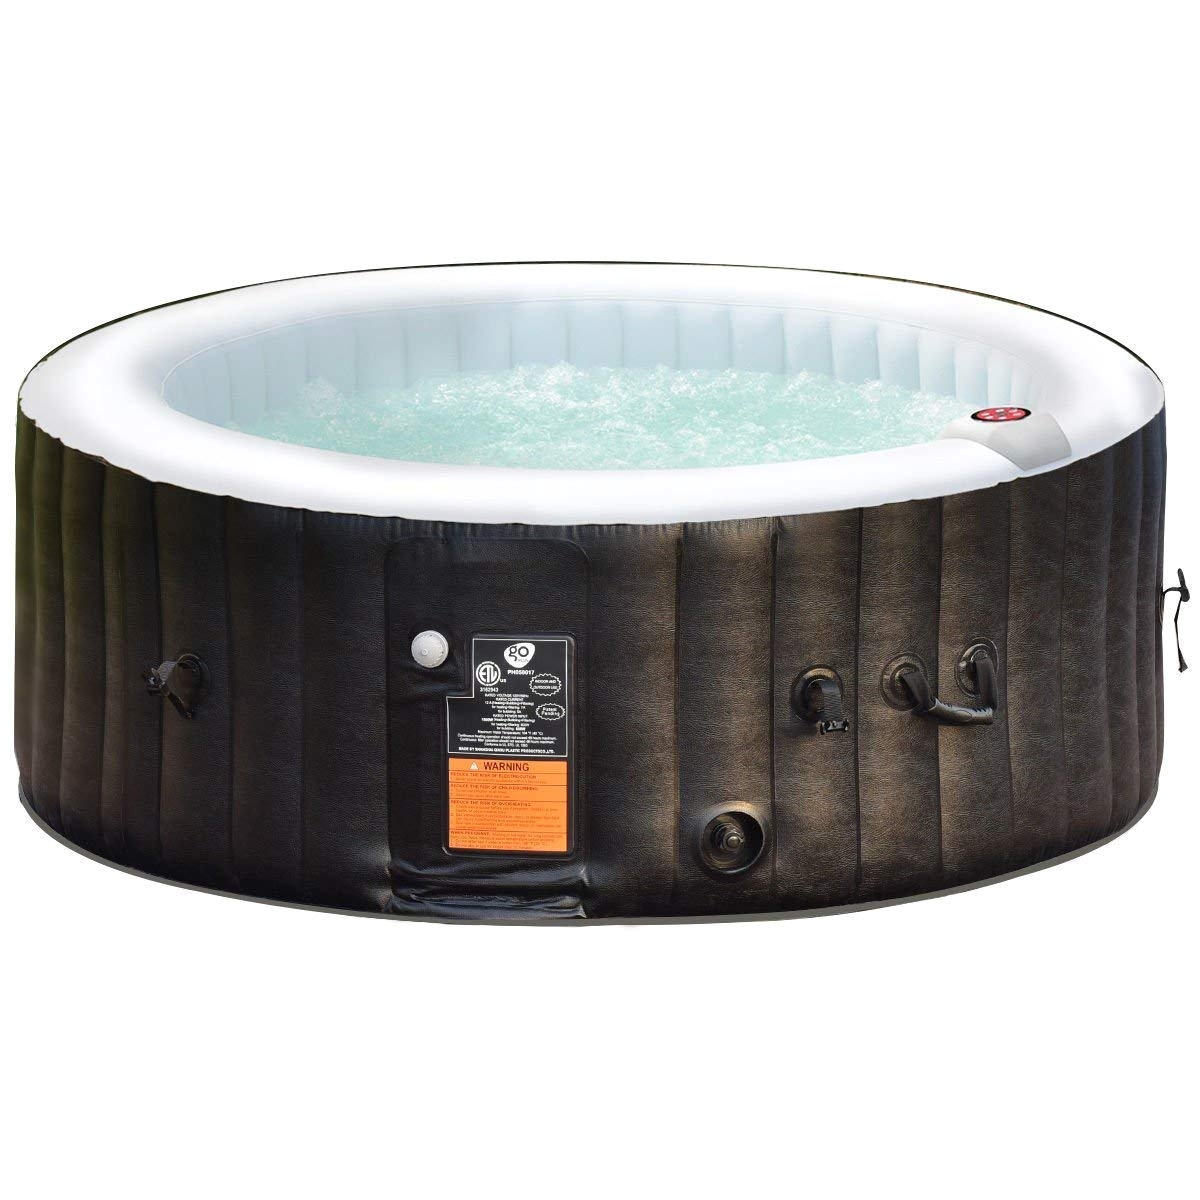 amazon com goplus 4 6 person outdoor spa inflatable hot tub for portable jets bubble massage relaxing w accessories set 4 person black garden